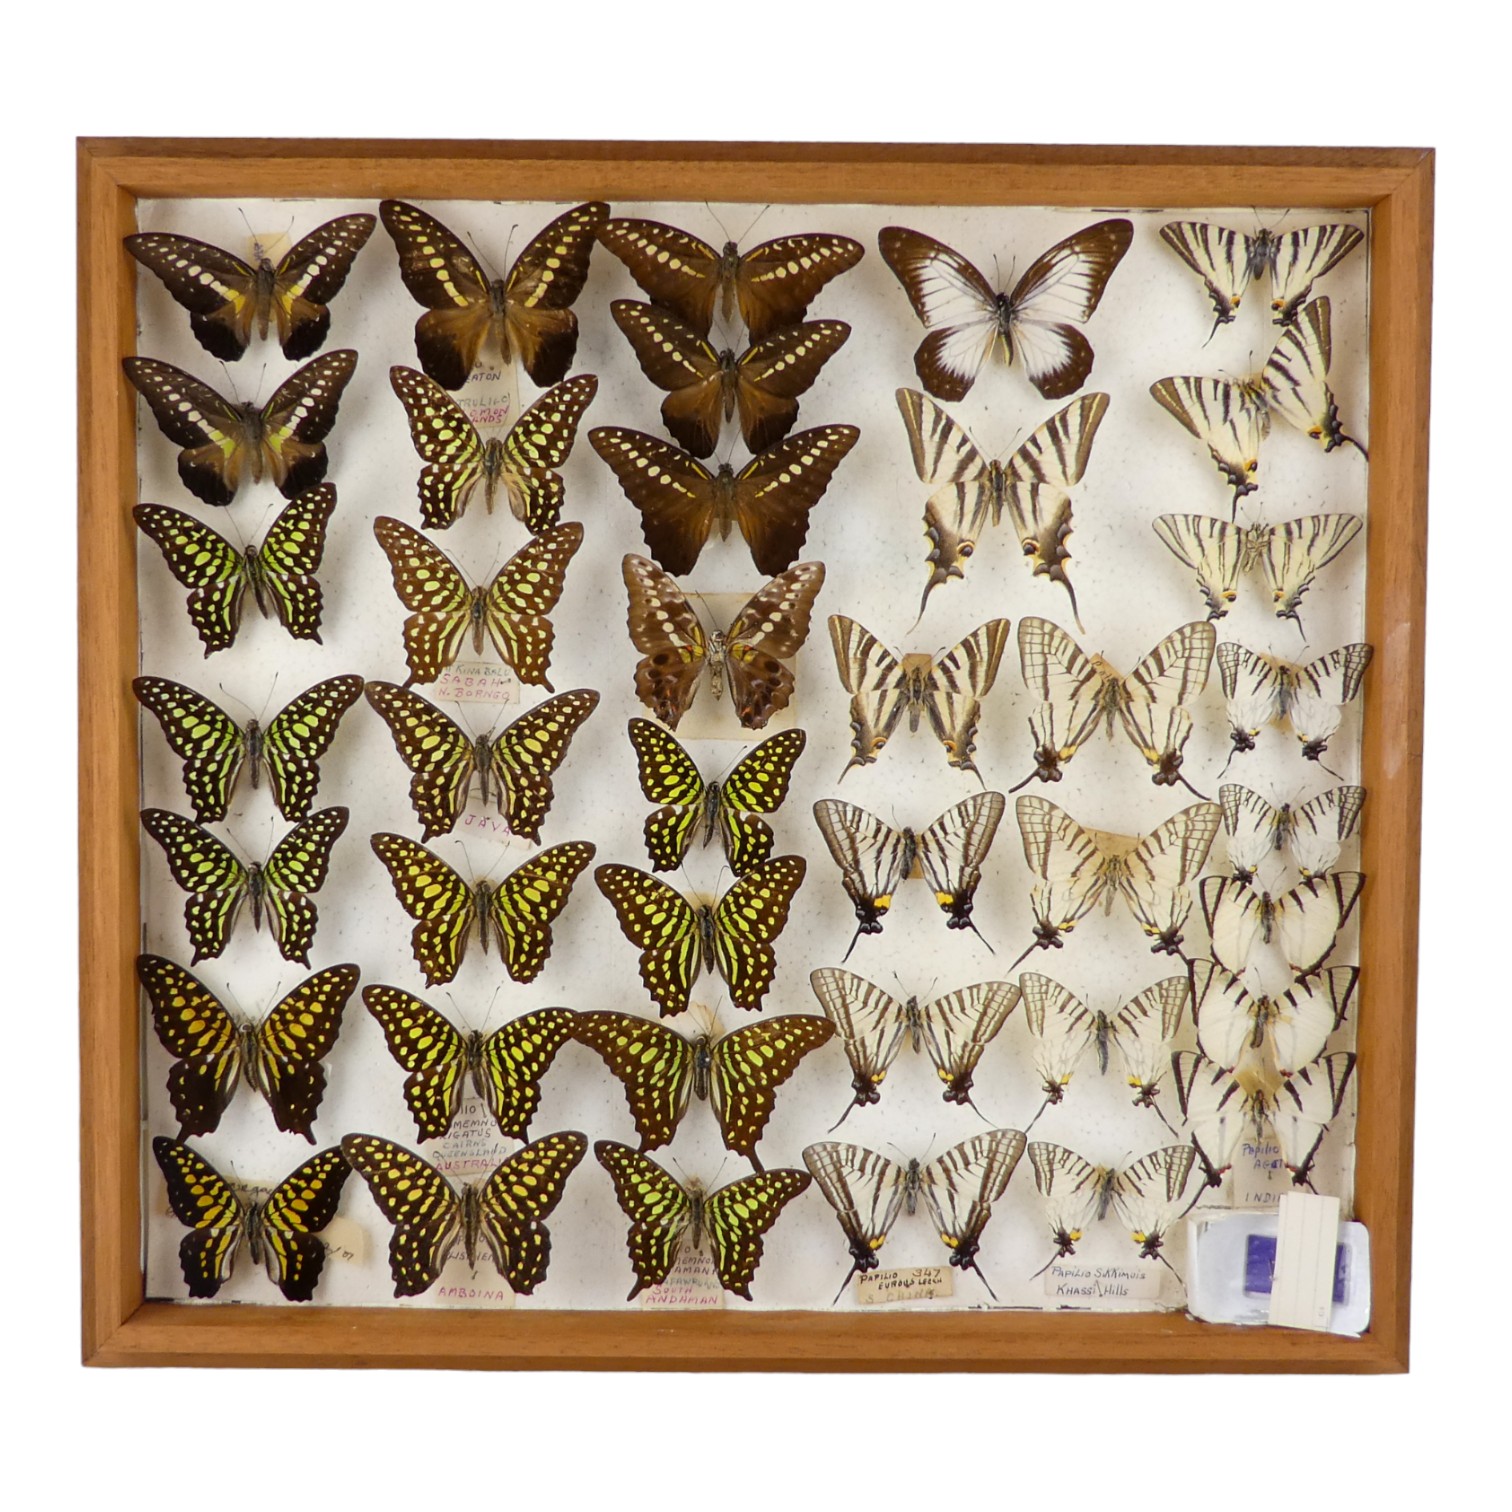 A case of butterflies in six rows - including Tailed Jay Swallowtail and Five Bar Swallowtail